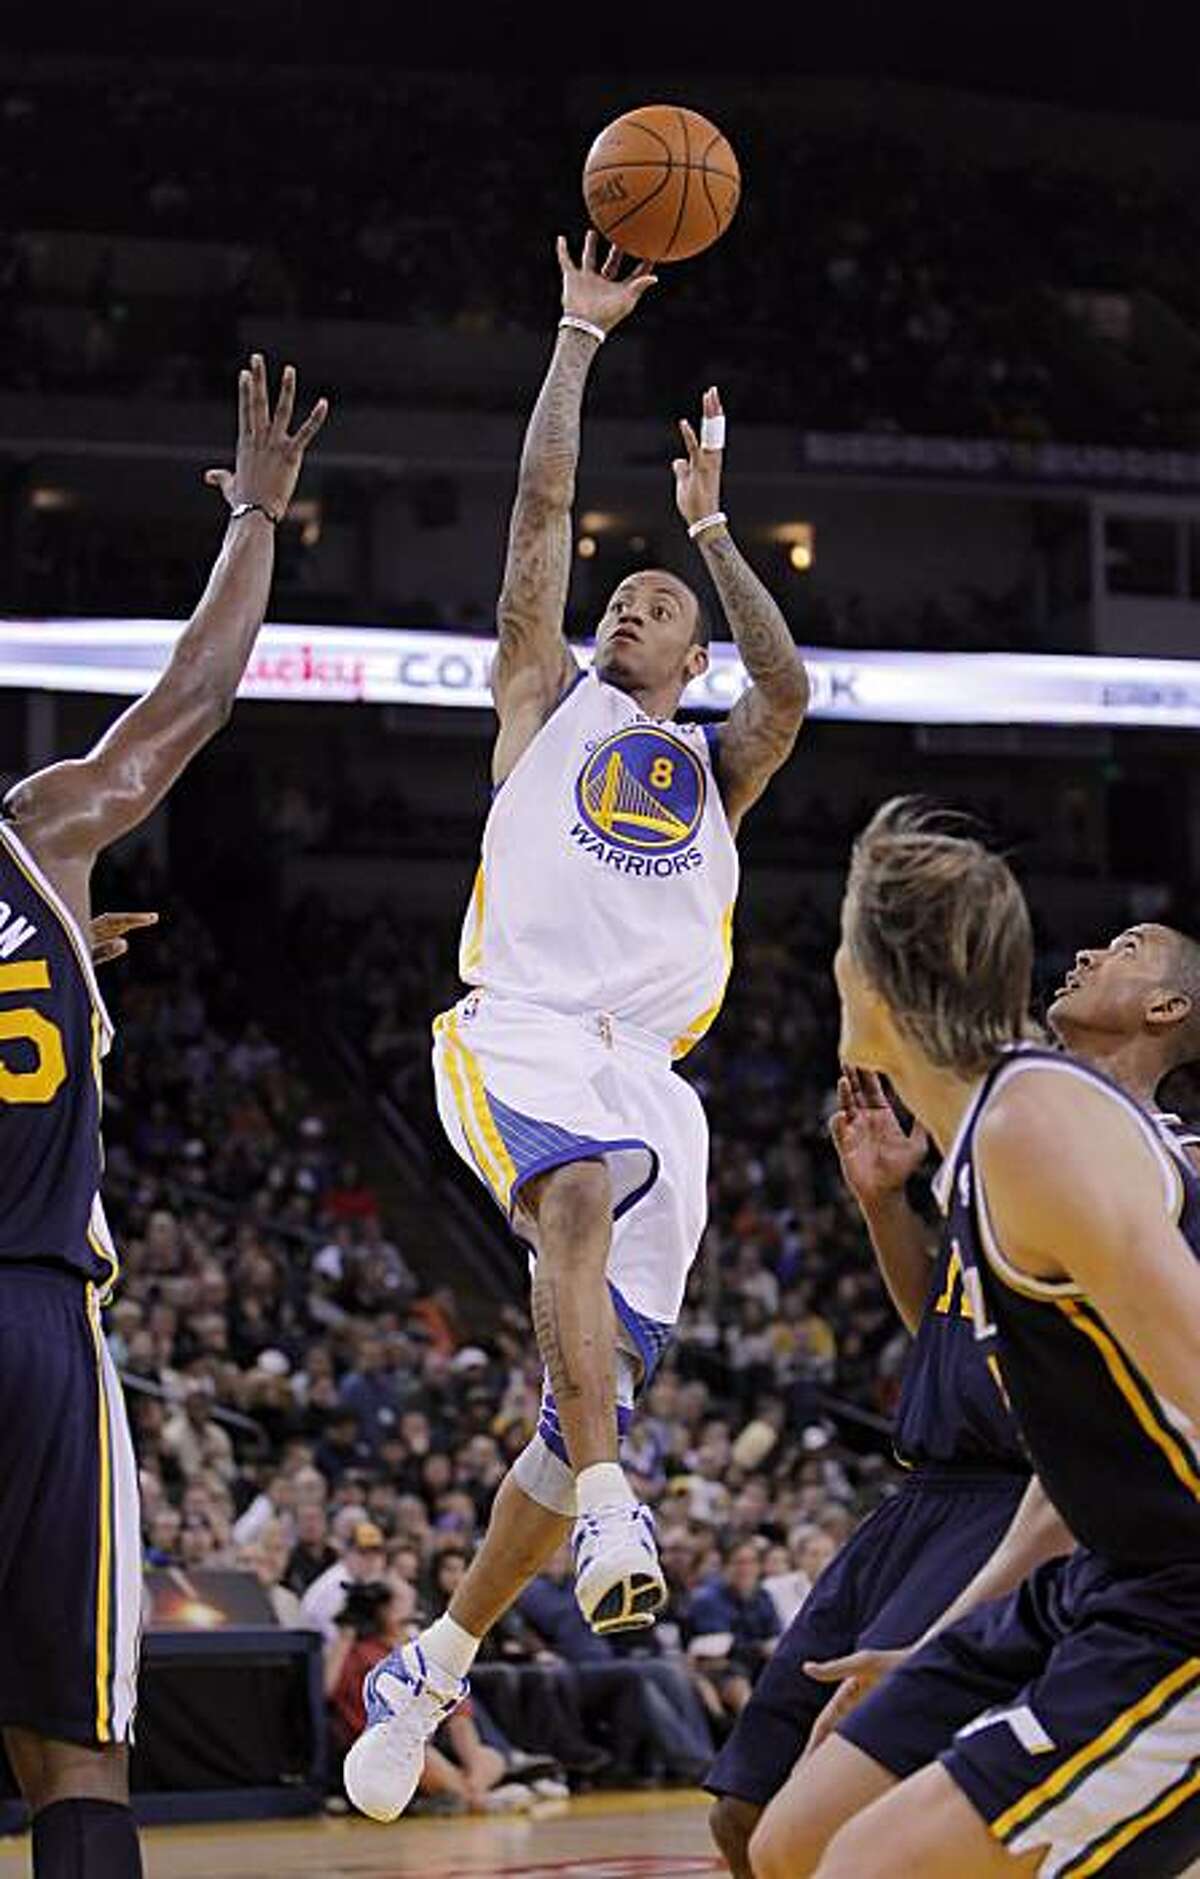 Monta Ellis puts up a shot in the first half. Ellis had no points for the first half against the Utah Jazz at Oracle Arena in Oakland on Sunday.